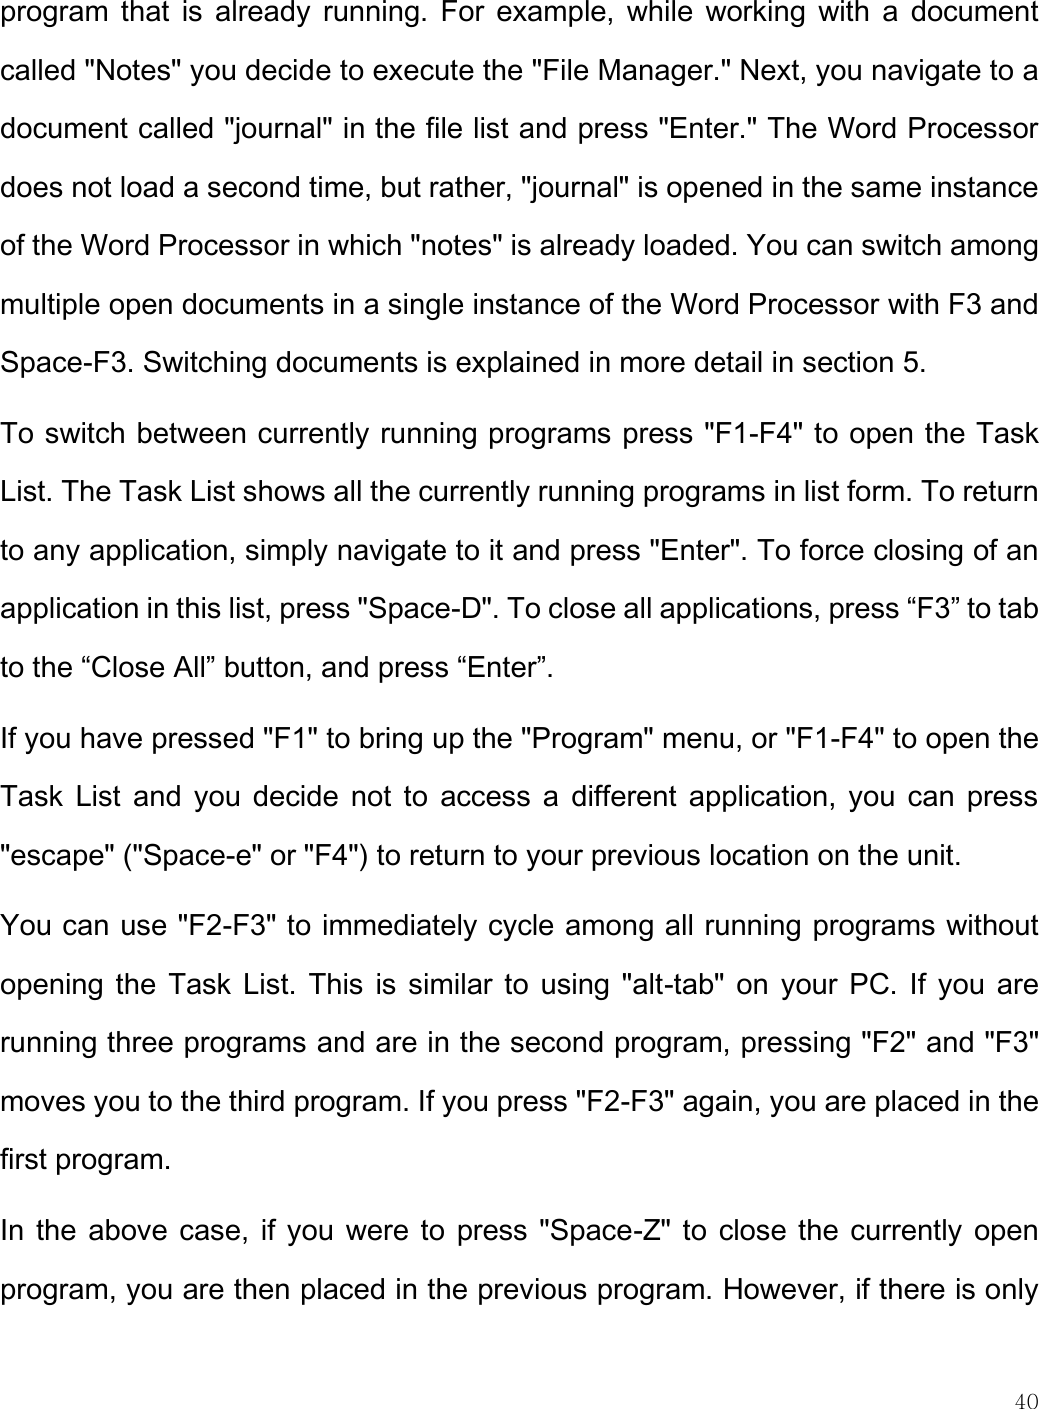    40  program that  is  already running.  For  example,  while  working with a  document called &quot;Notes&quot; you decide to execute the &quot;File Manager.&quot; Next, you navigate to a document called &quot;journal&quot; in the file list and press &quot;Enter.&quot; The Word Processor does not load a second time, but rather, &quot;journal&quot; is opened in the same instance of the Word Processor in which &quot;notes&quot; is already loaded. You can switch among multiple open documents in a single instance of the Word Processor with F3 and Space-F3. Switching documents is explained in more detail in section 5.  To switch between currently running programs press &quot;F1-F4&quot; to open the Task List. The Task List shows all the currently running programs in list form. To return to any application, simply navigate to it and press &quot;Enter&quot;. To force closing of an application in this list, press &quot;Space-D&quot;. To close all applications, press “F3” to tab to the “Close All” button, and press “Enter”. If you have pressed &quot;F1&quot; to bring up the &quot;Program&quot; menu, or &quot;F1-F4&quot; to open the Task  List  and  you decide not to  access a  different application, you can  press &quot;escape&quot; (&quot;Space-e&quot; or &quot;F4&quot;) to return to your previous location on the unit. You can use &quot;F2-F3&quot; to immediately cycle among all running programs without opening the Task List.  This  is similar to using &quot;alt-tab&quot; on  your PC. If you are running three programs and are in the second program, pressing &quot;F2&quot; and &quot;F3&quot; moves you to the third program. If you press &quot;F2-F3&quot; again, you are placed in the first program. In the above case, if you were to press &quot;Space-Z&quot; to close the currently open program, you are then placed in the previous program. However, if there is only 